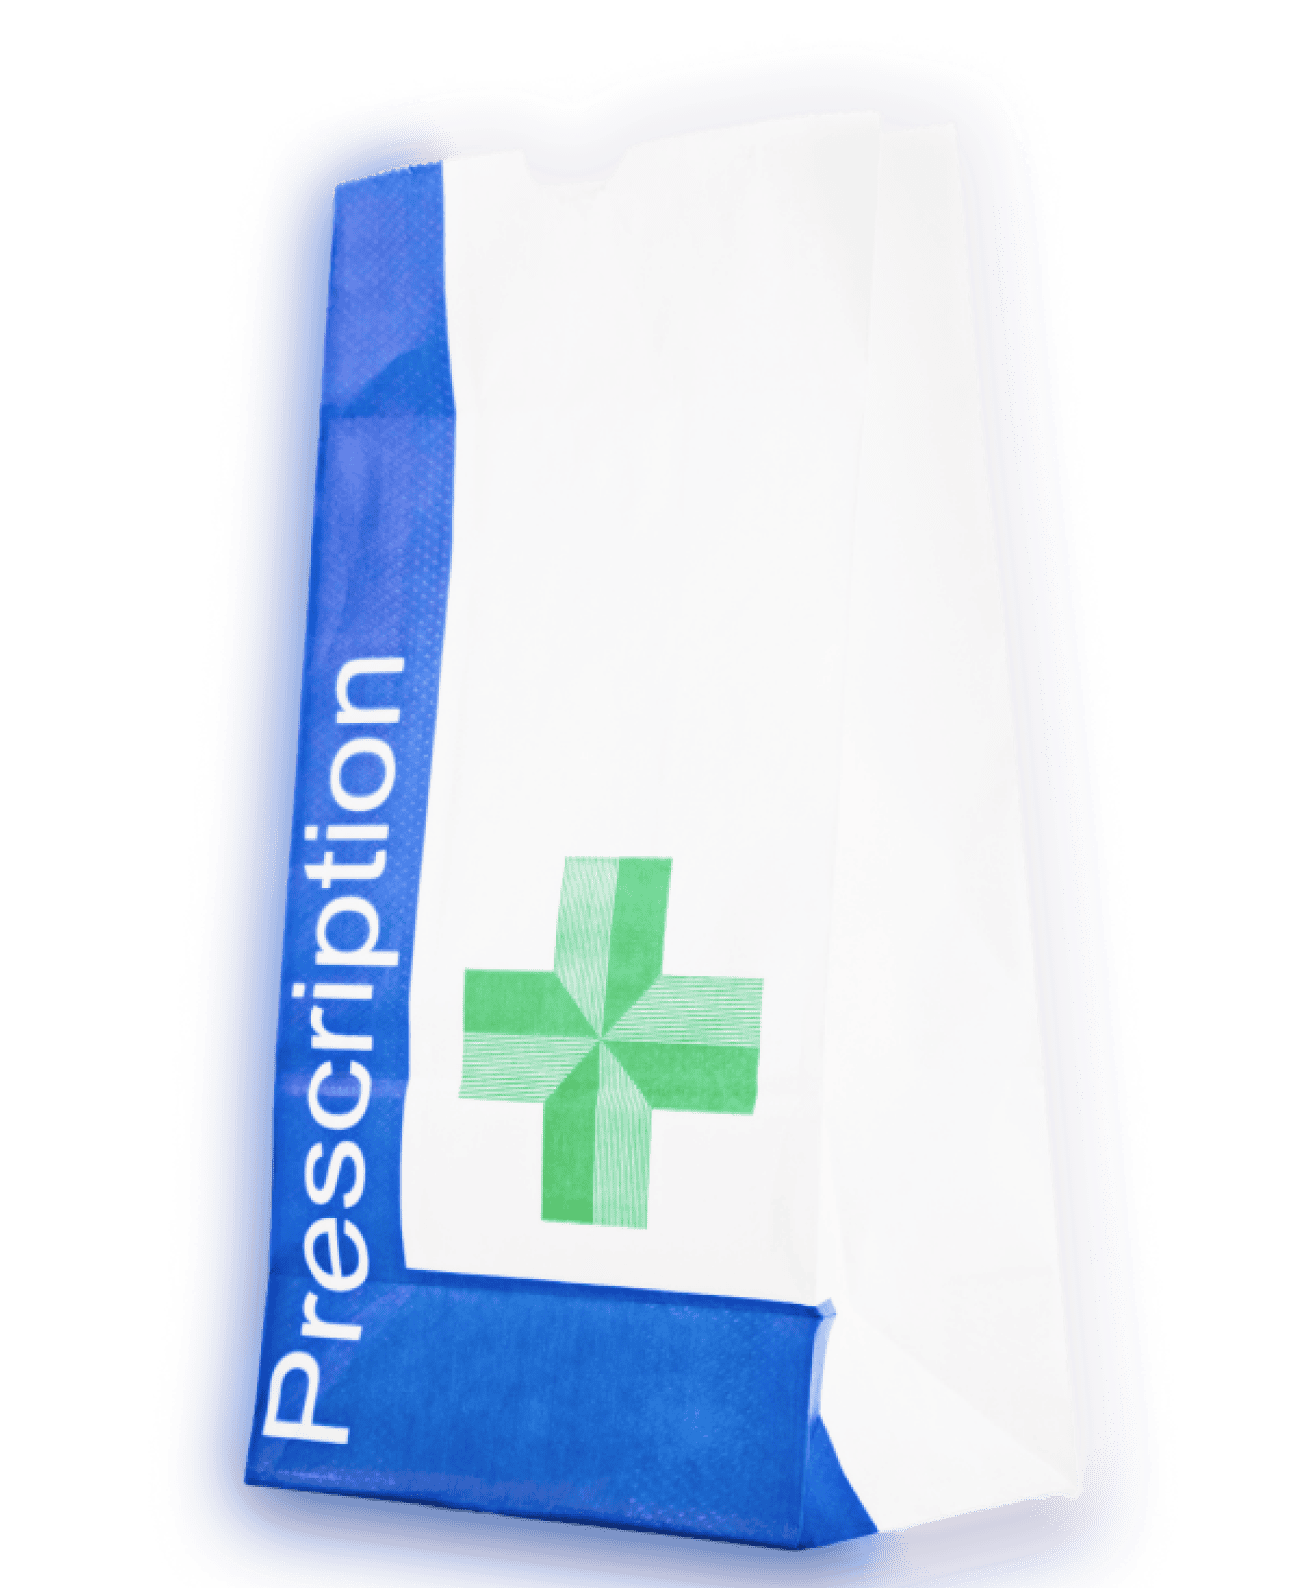 A white and blue prescription paper bag with a green cross symbol on it.